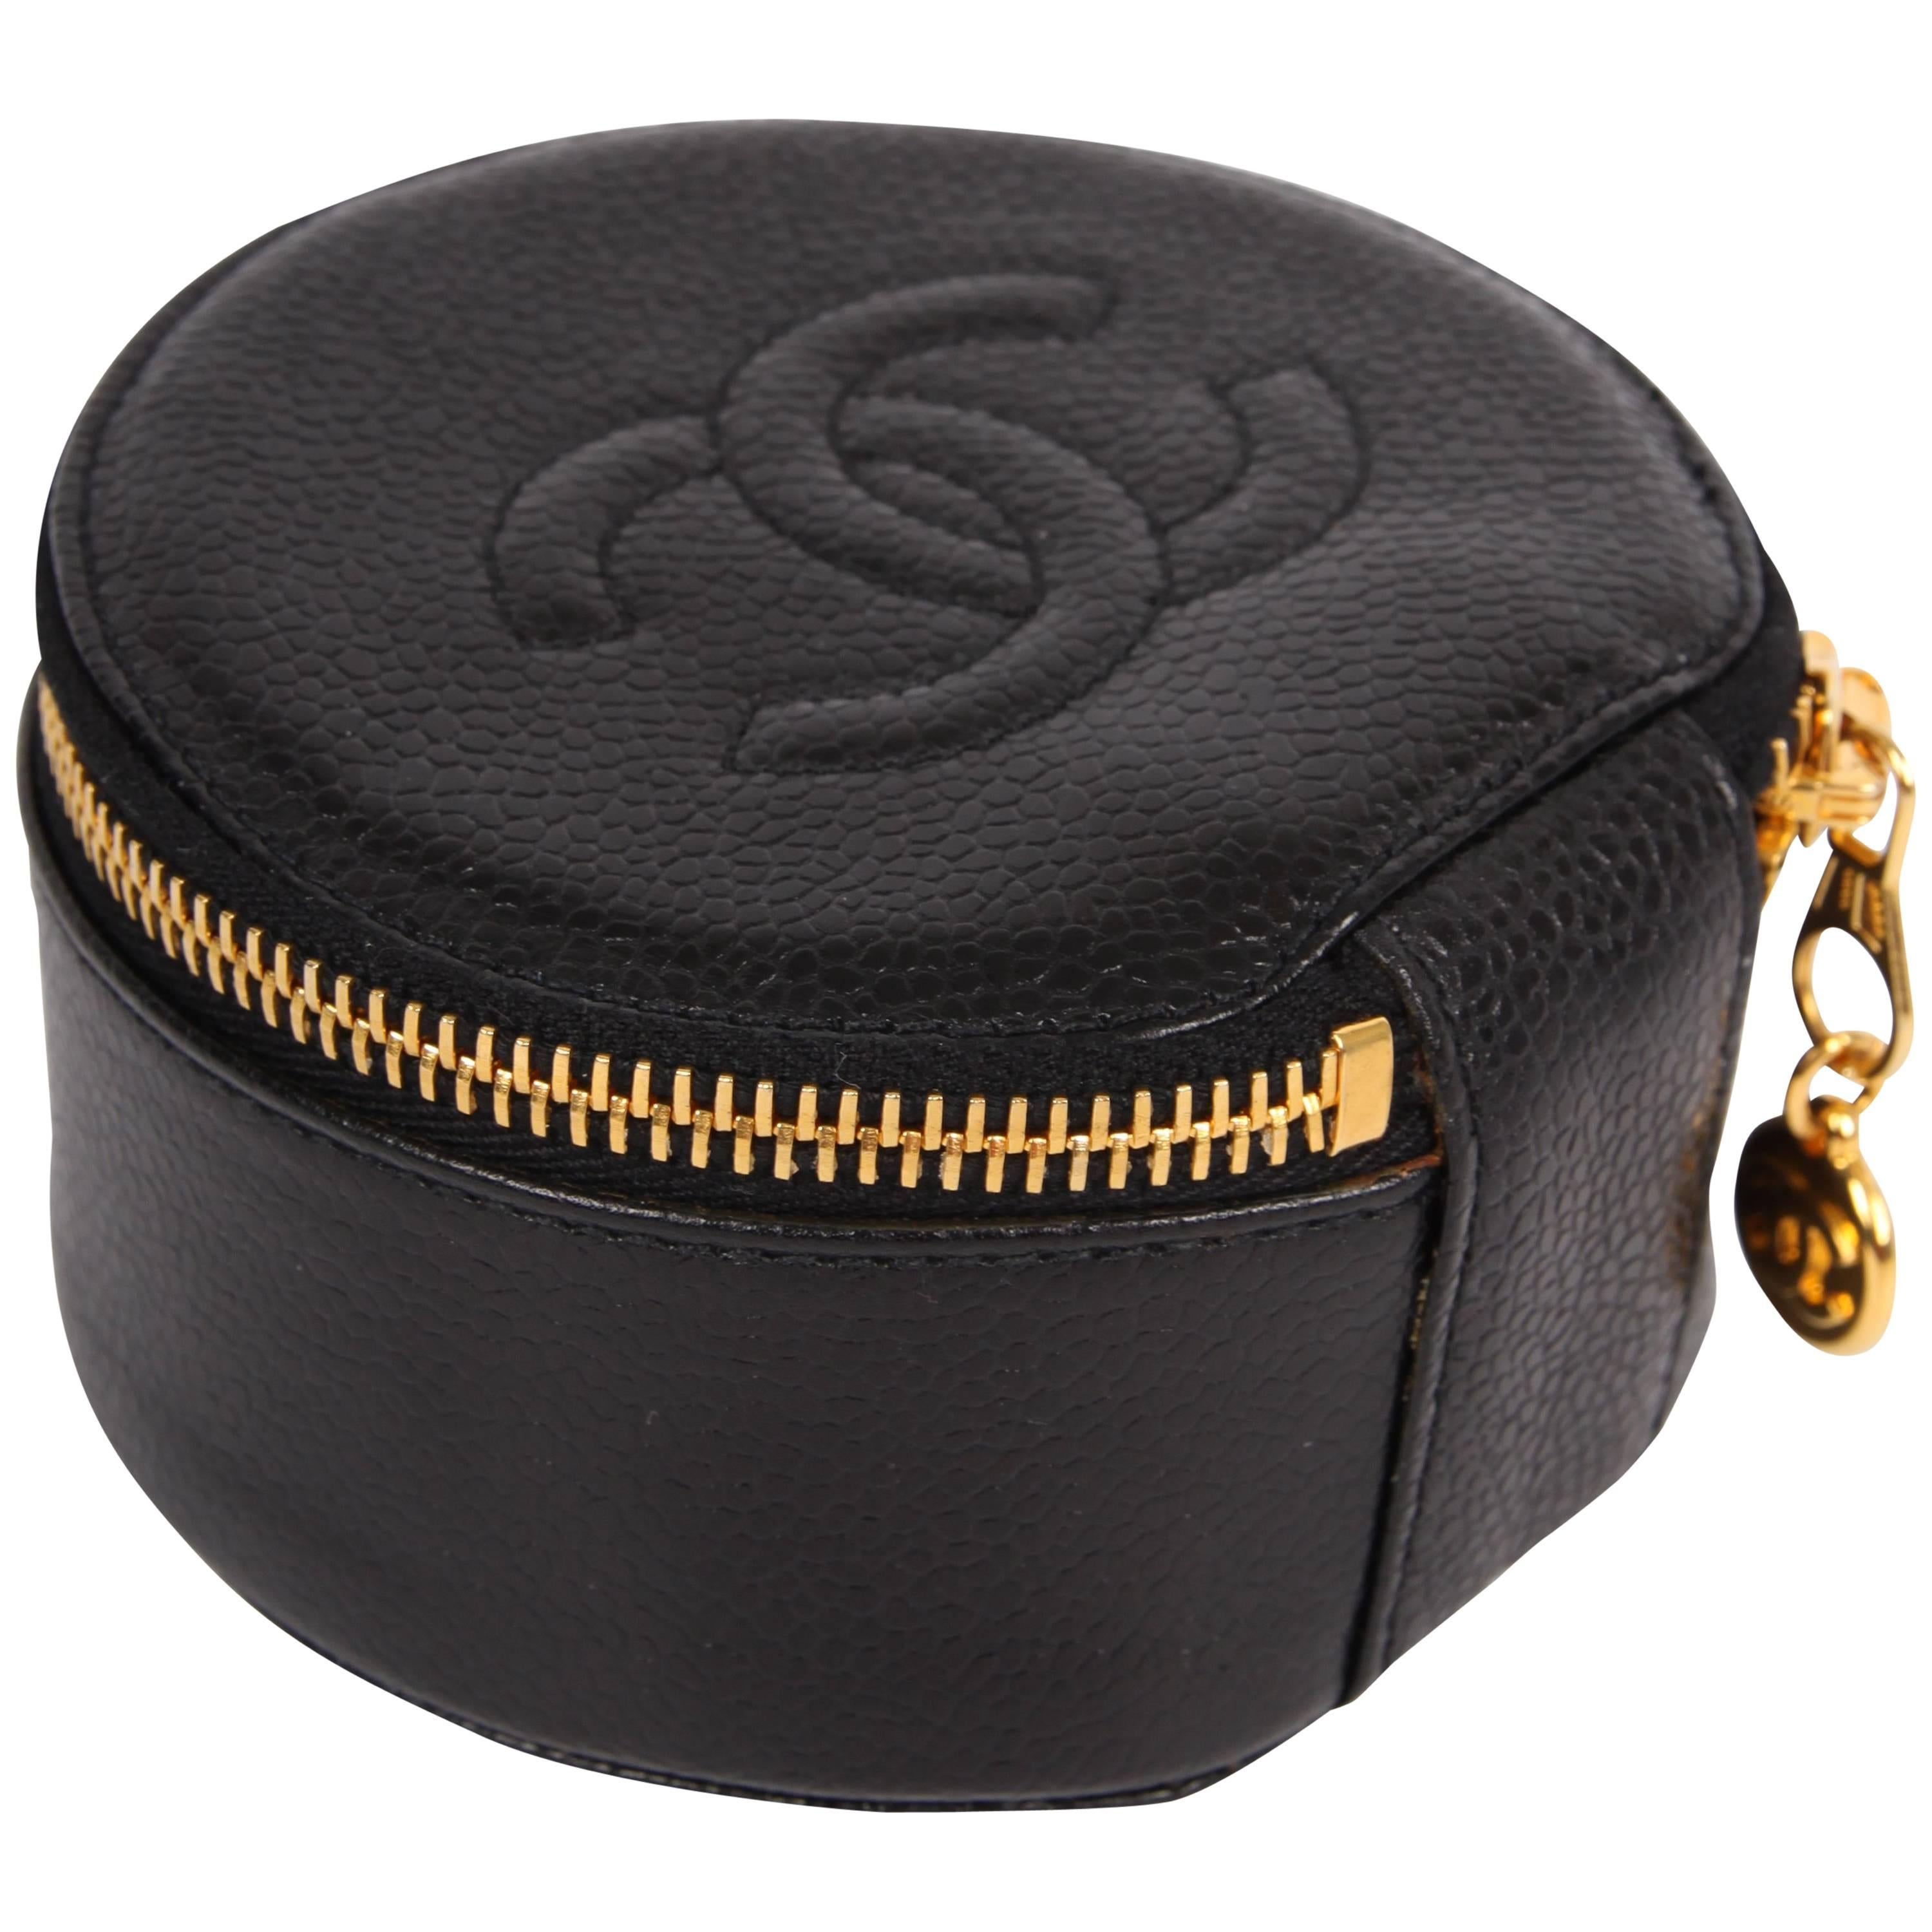 Chanel CC Caviar Leather Jewelry Case / Round Pouch Bag - black 1991